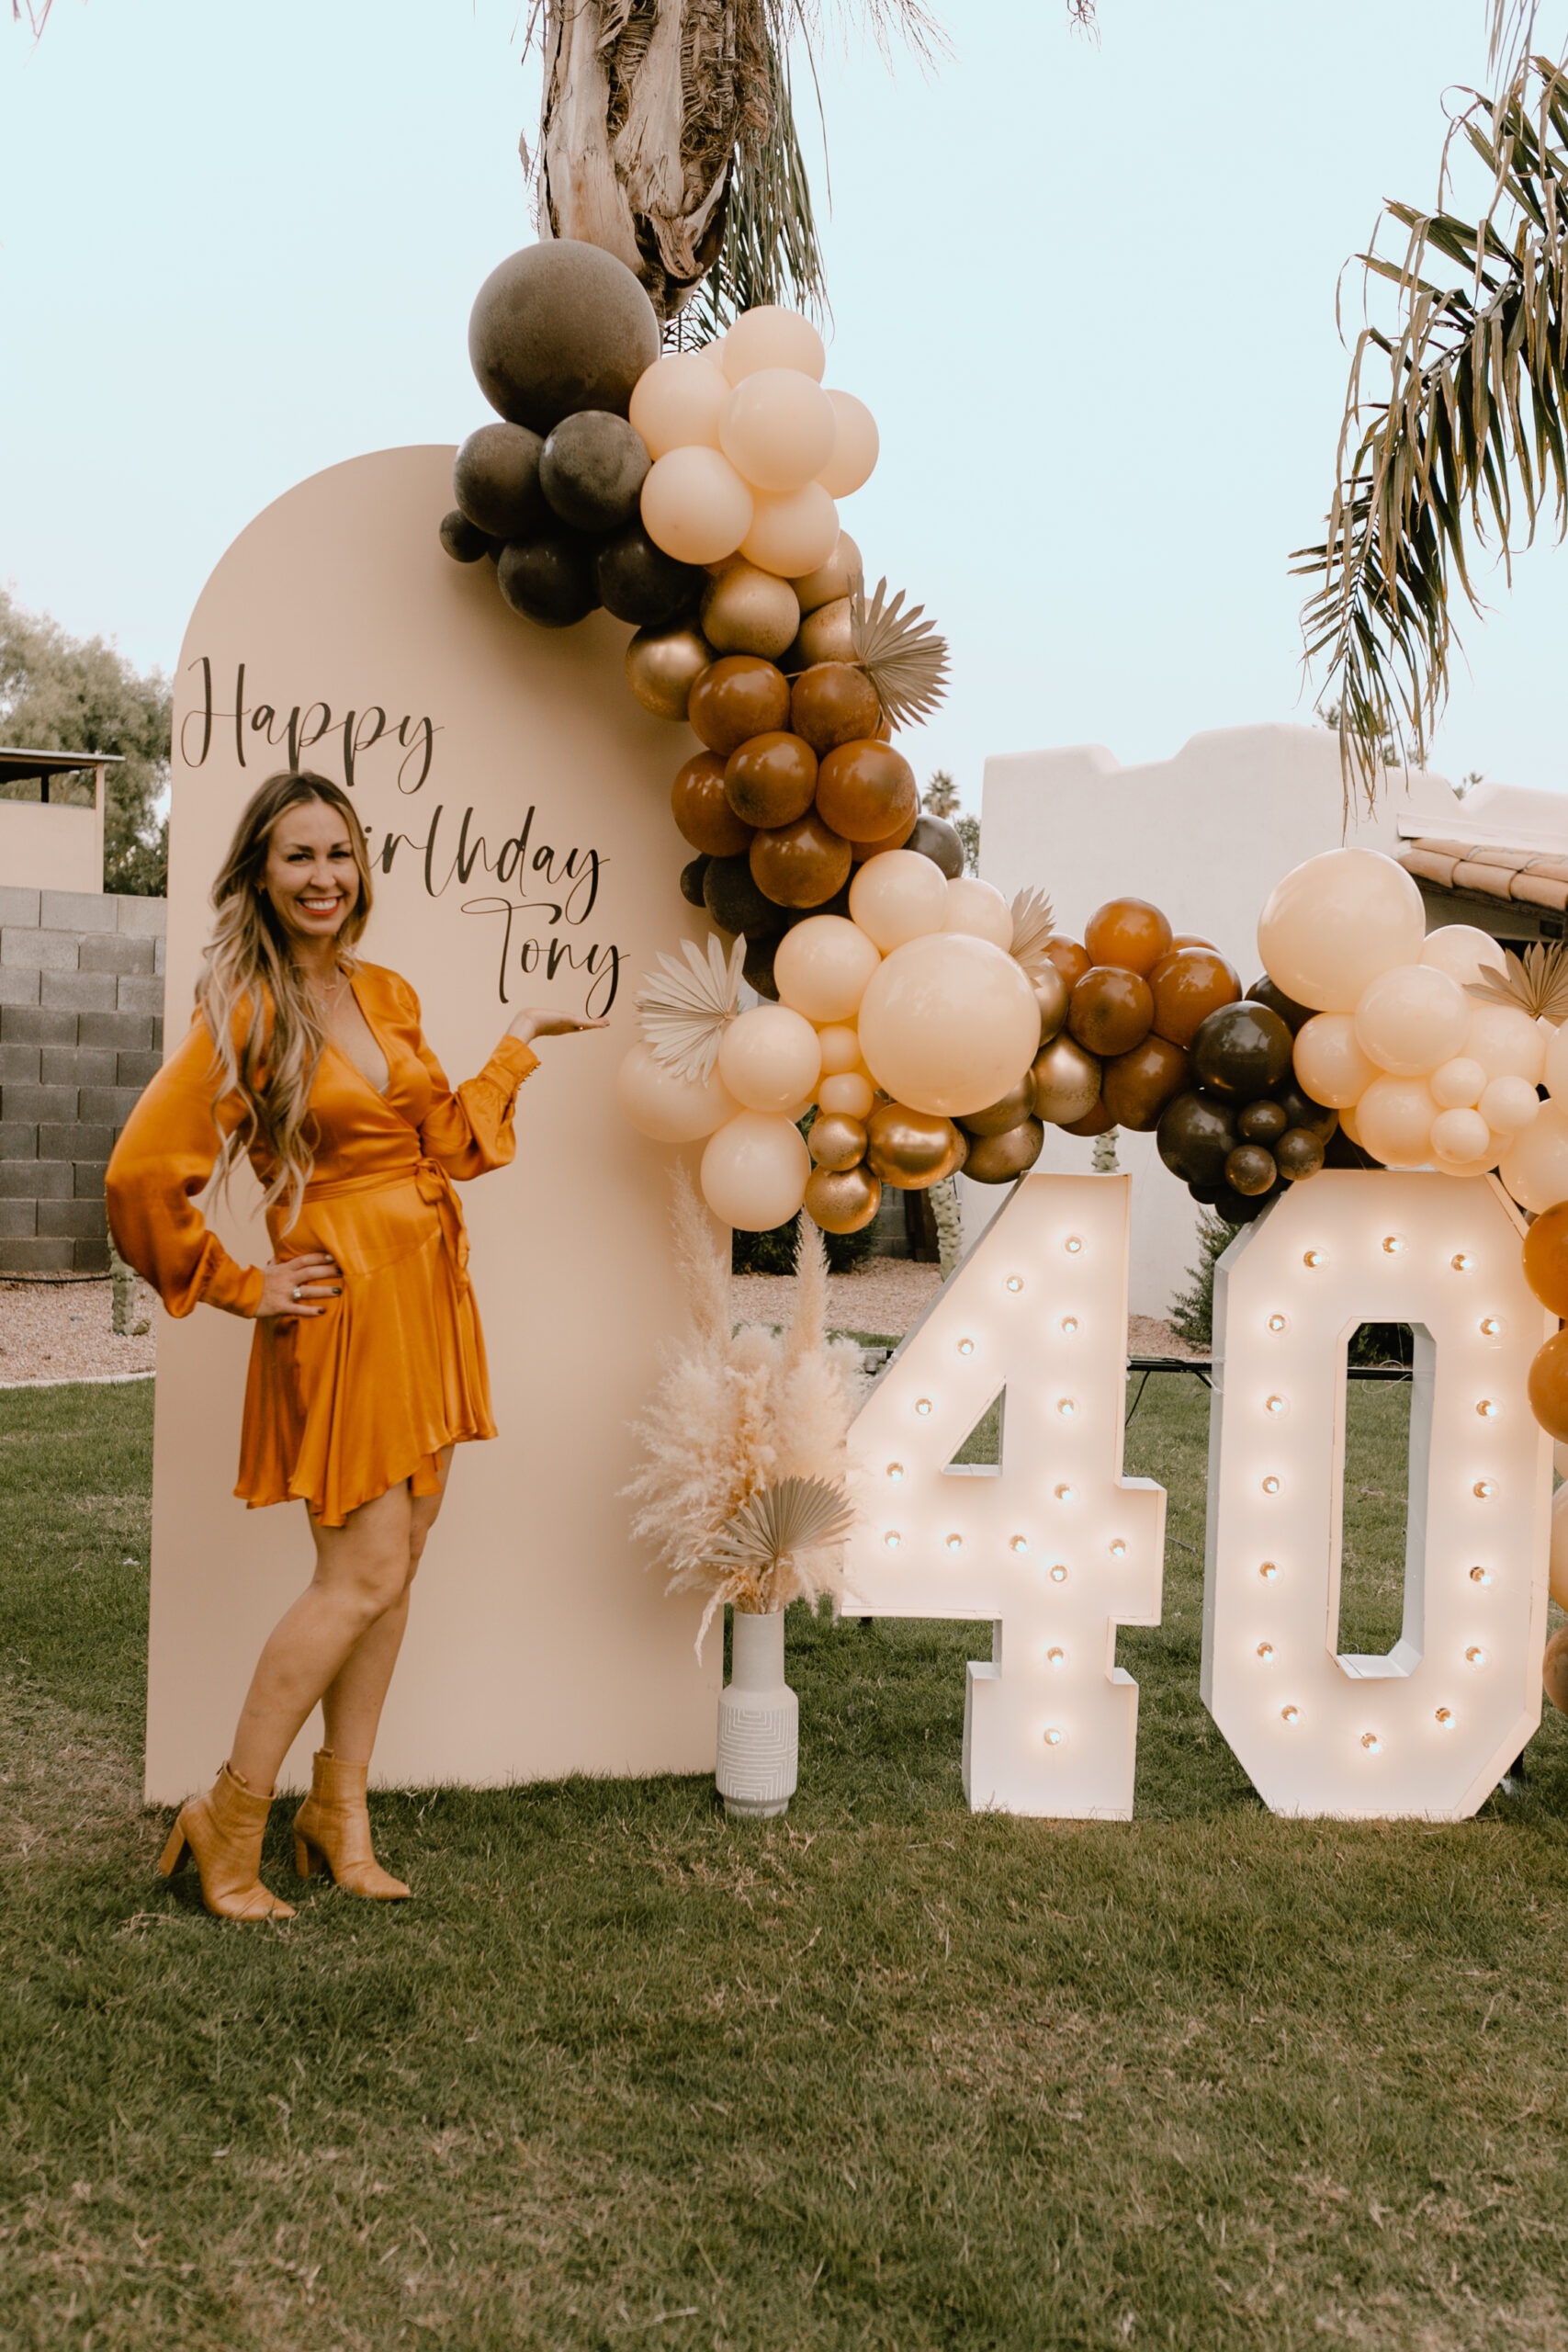 the photo backdrop for my husband's surprise 40th birthday party! #balloongarland #diyballoons #guysbirthdayparty